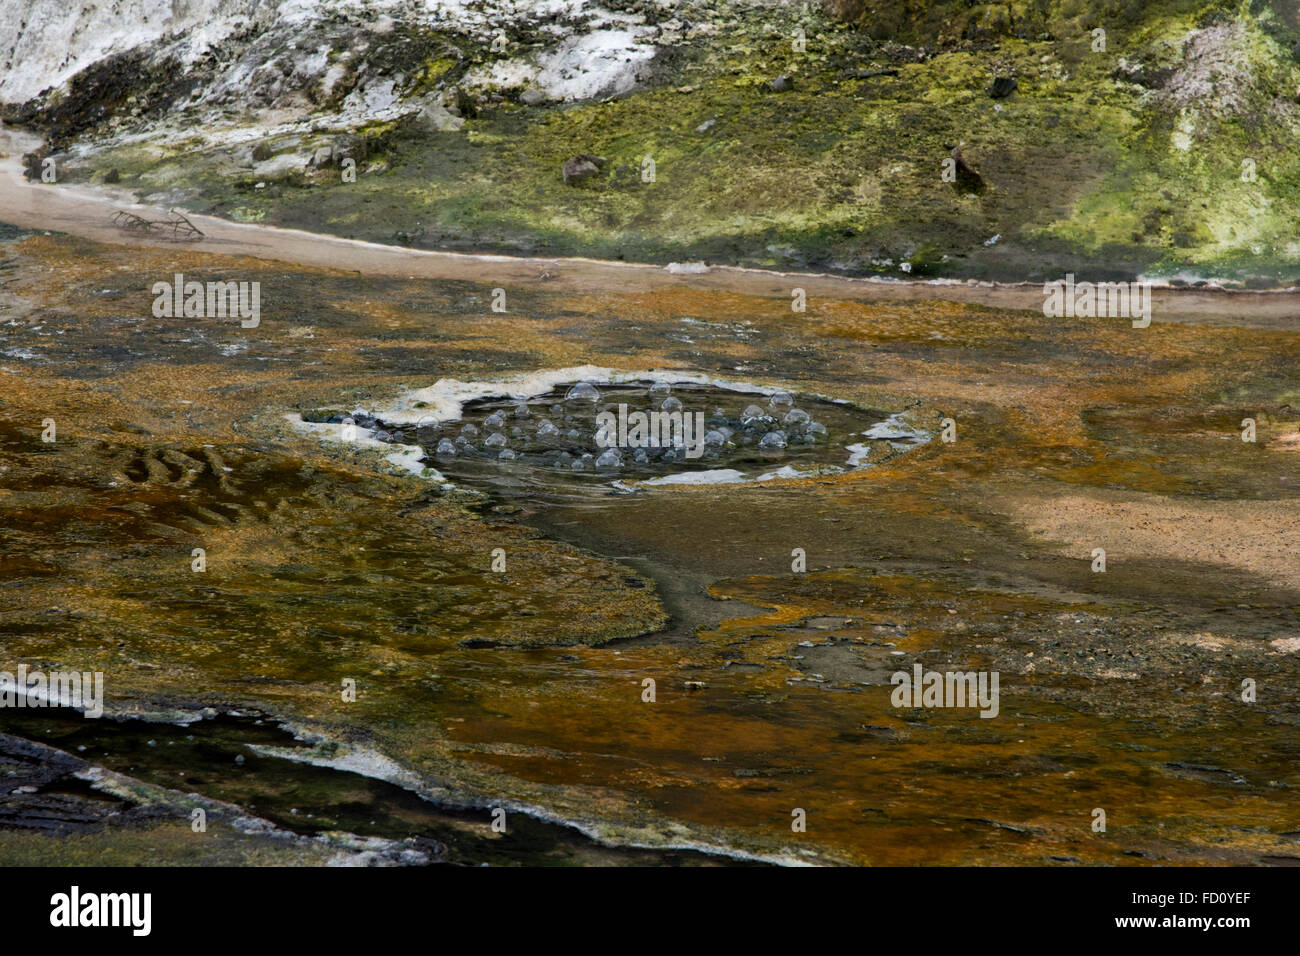 Bubbling water at the Warbrick Terraces in the Waimangu Valley in New Zealand. Stock Photo